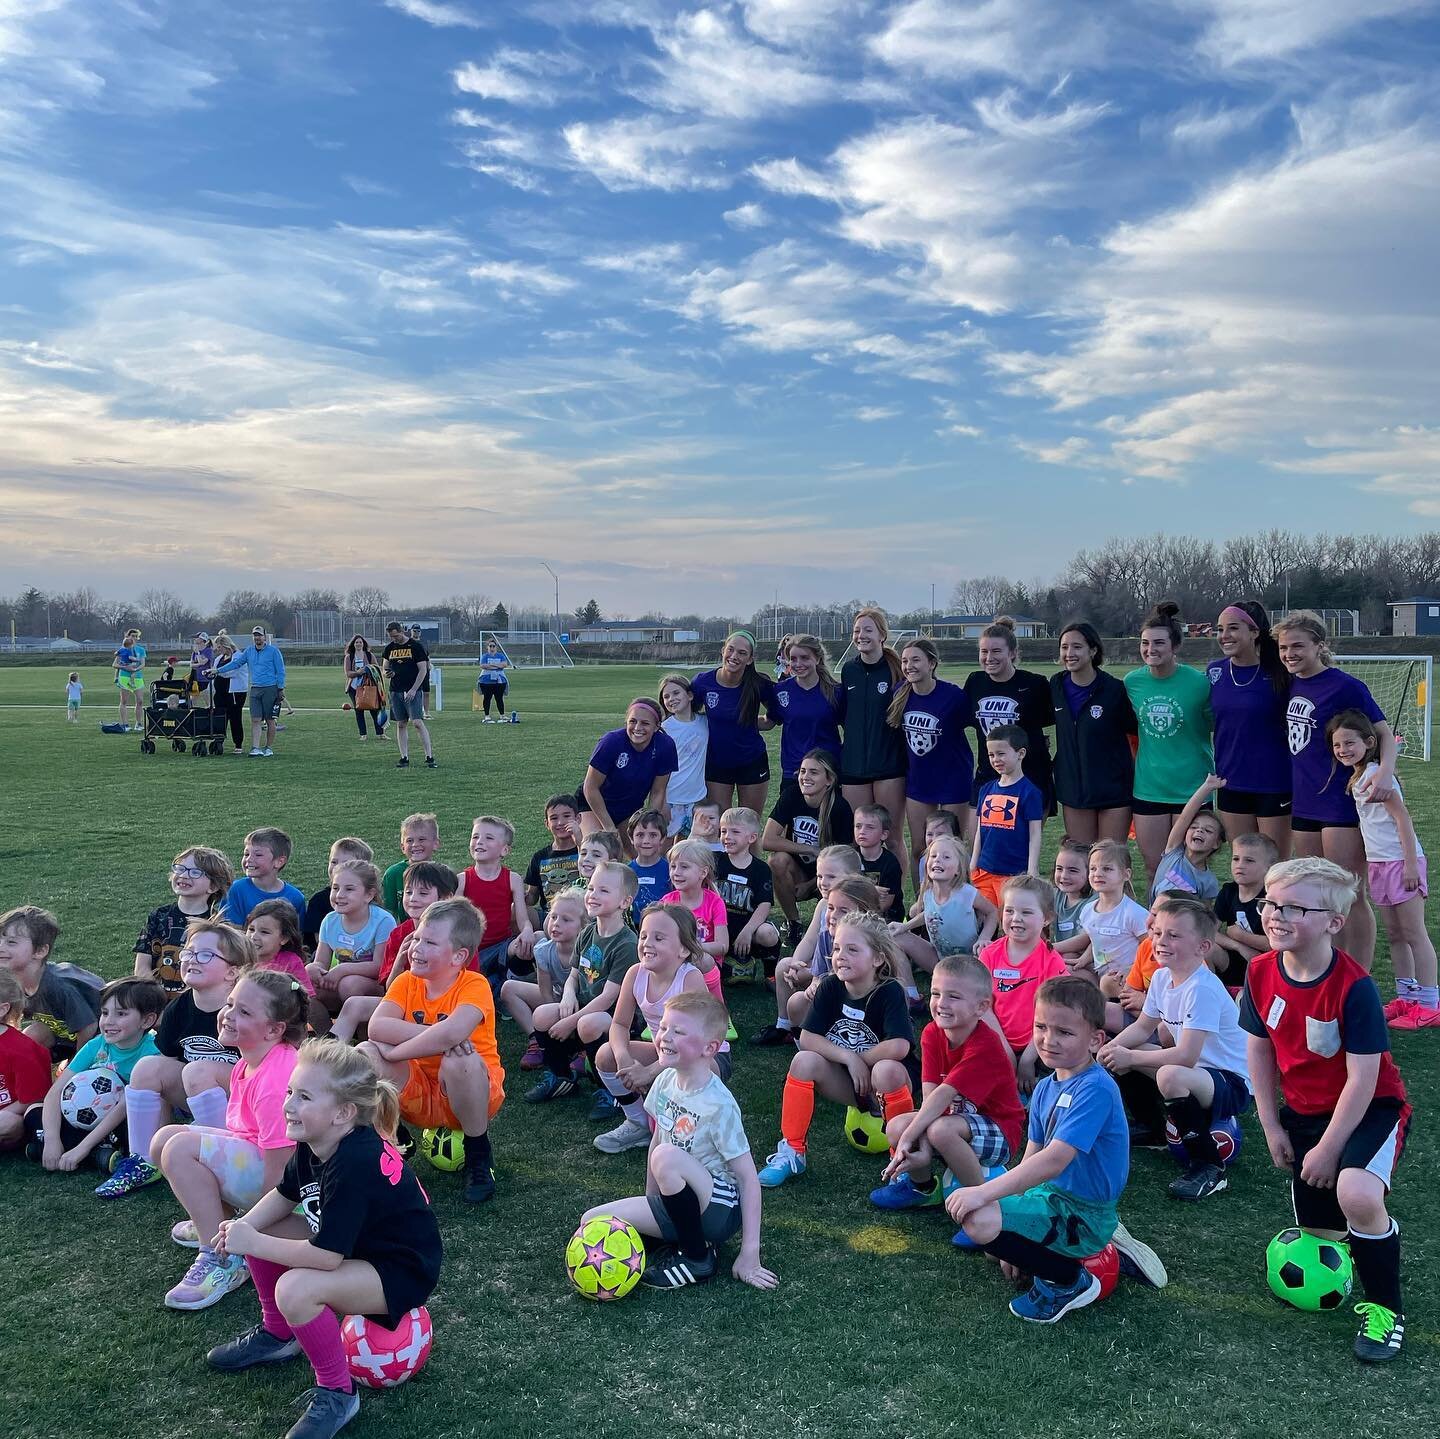 We had our first Kicks 4 Kids of the season Friday night and what a great night for soccer! THANK YOU to our volunteer coaches from UNI Panther Soccer for helping out with our two sessions along with Coach James, Coach Jake, and Coach Jami.
See you a